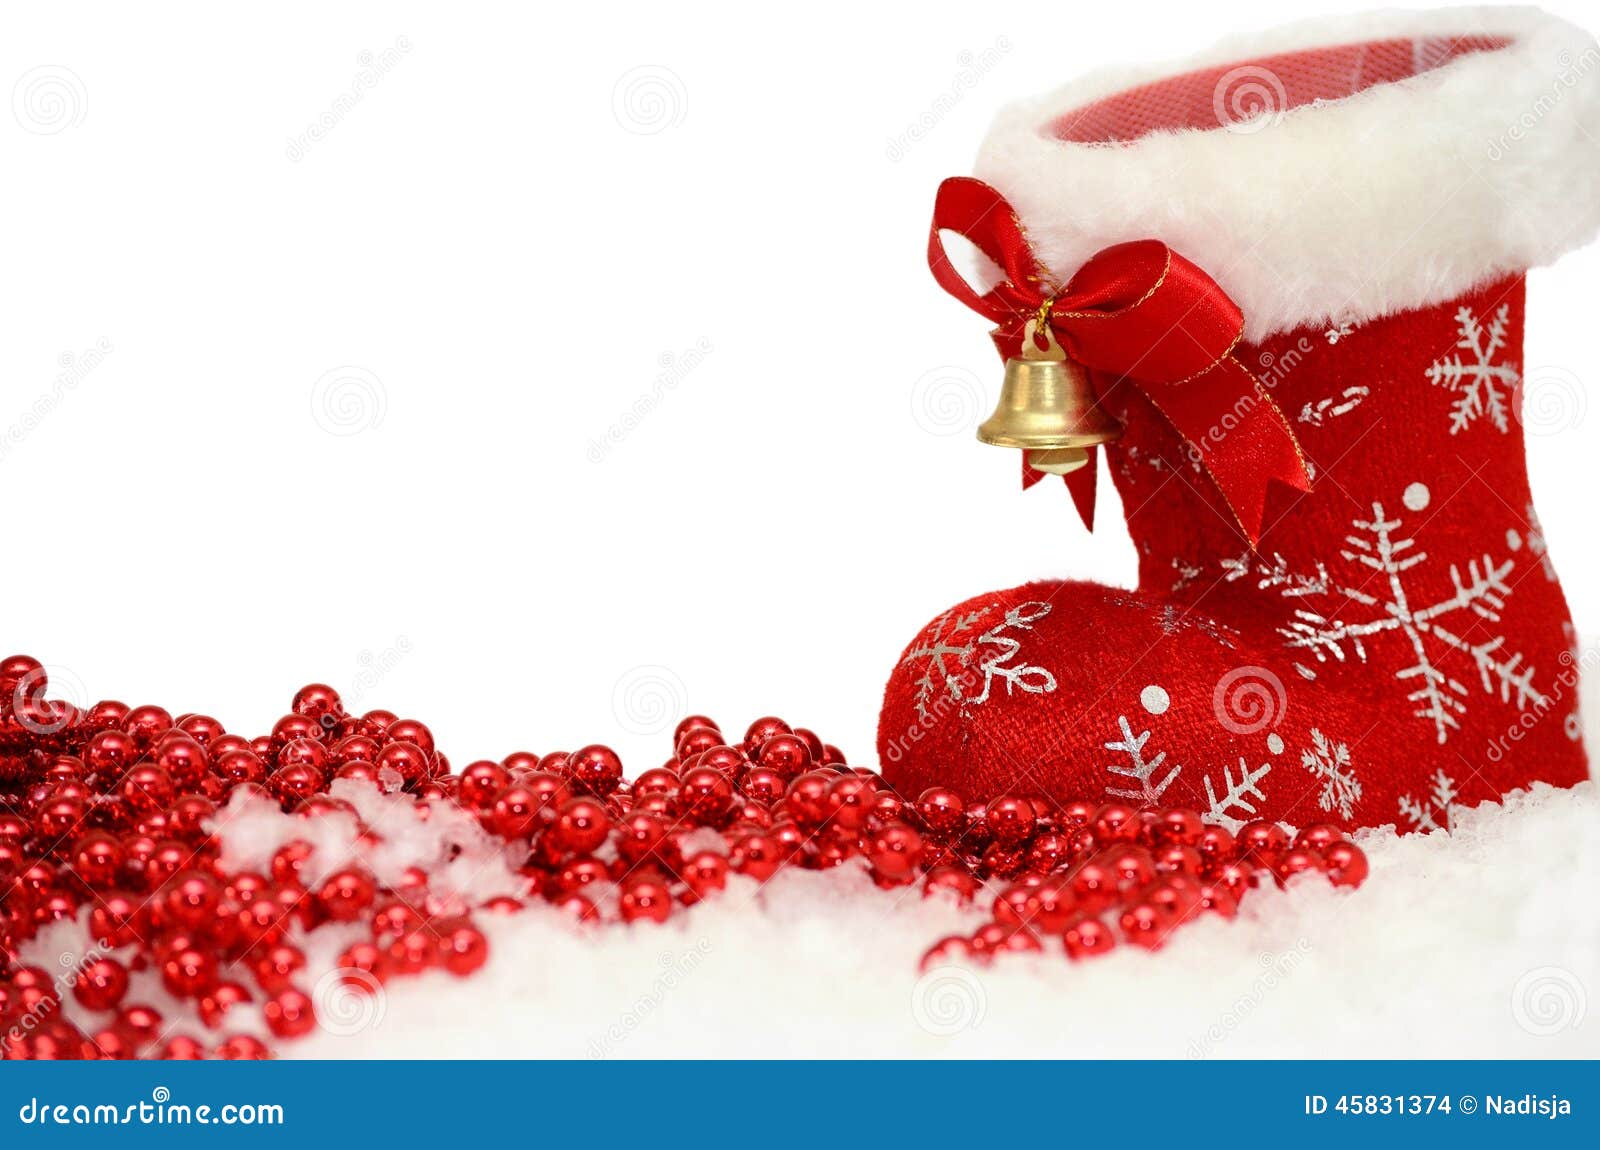 Christmas Background with Red Santa S Boot in Snow on White Stock Photo ...